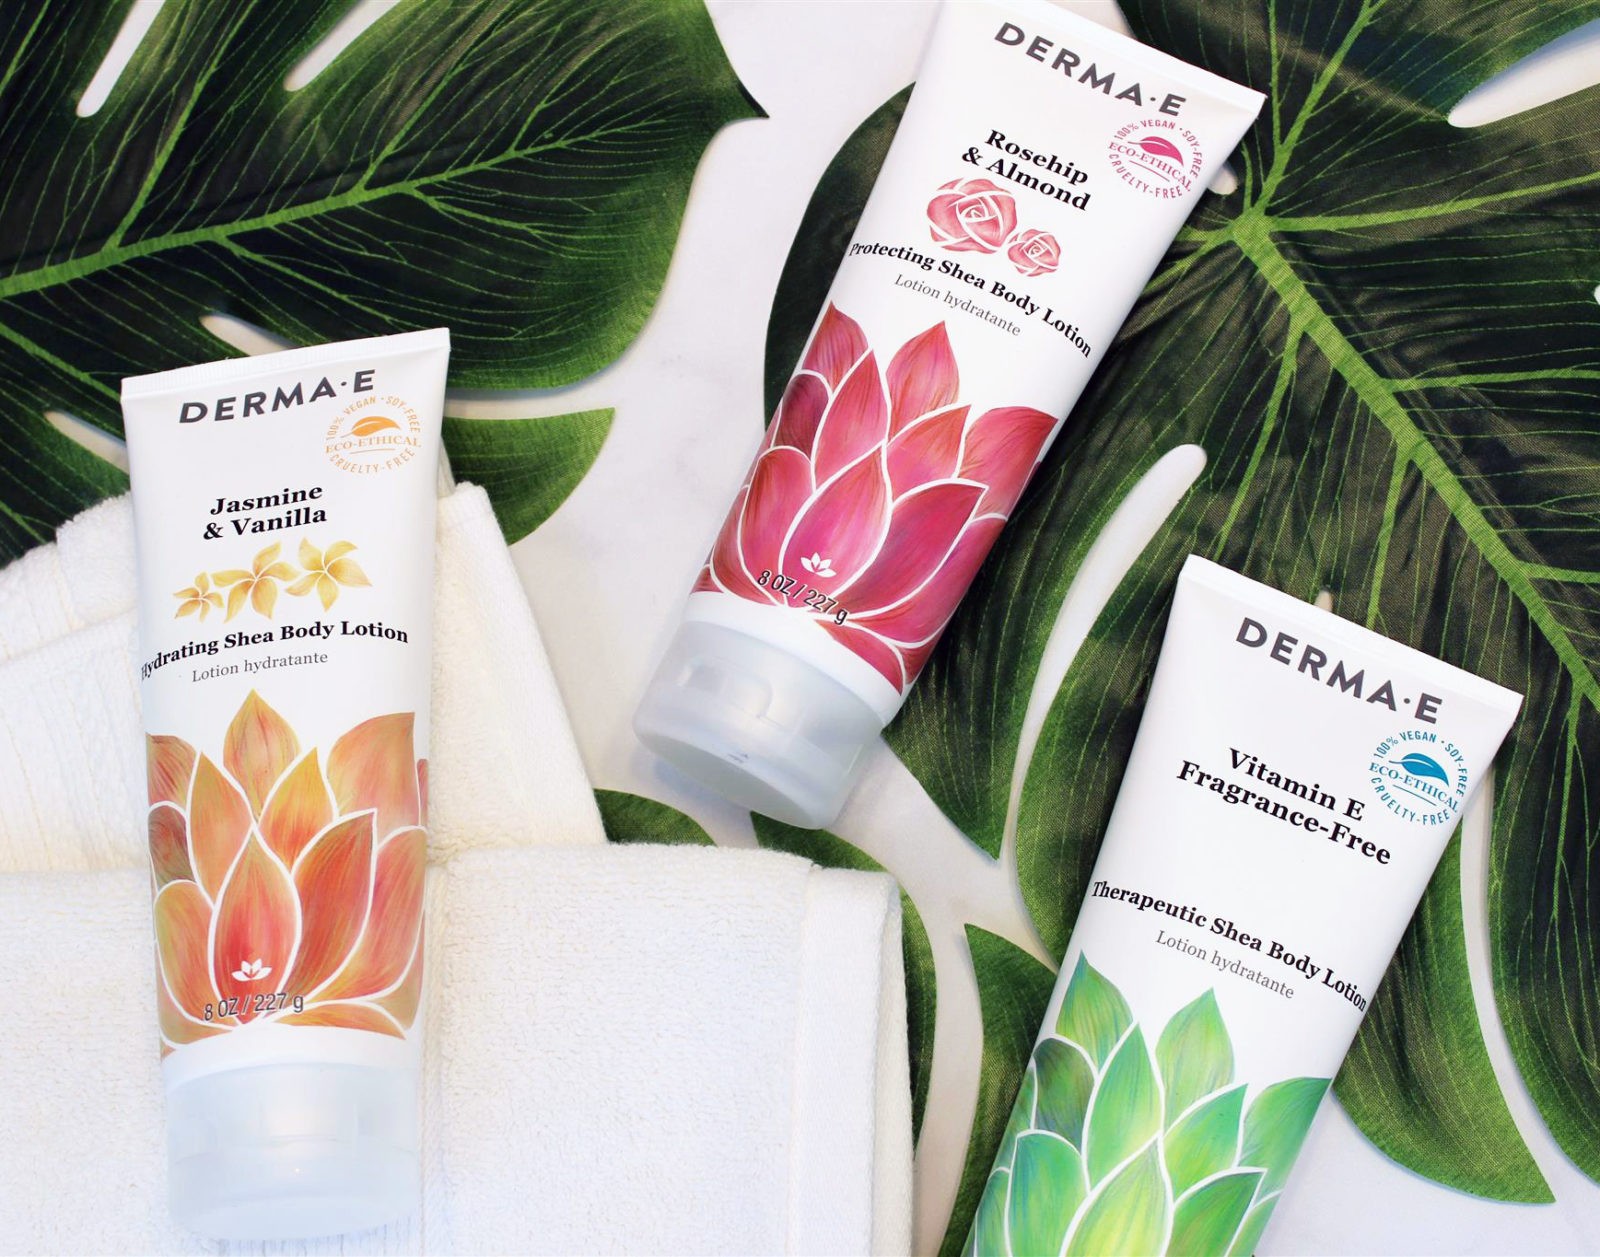 Derma E - Cruelty Free and Vegan Body Lotion Review - Derma E Vegan and Cruelty Free Vegan Body Lotion Review by Los Angeles Beauty Blogger My Beauty Bunny